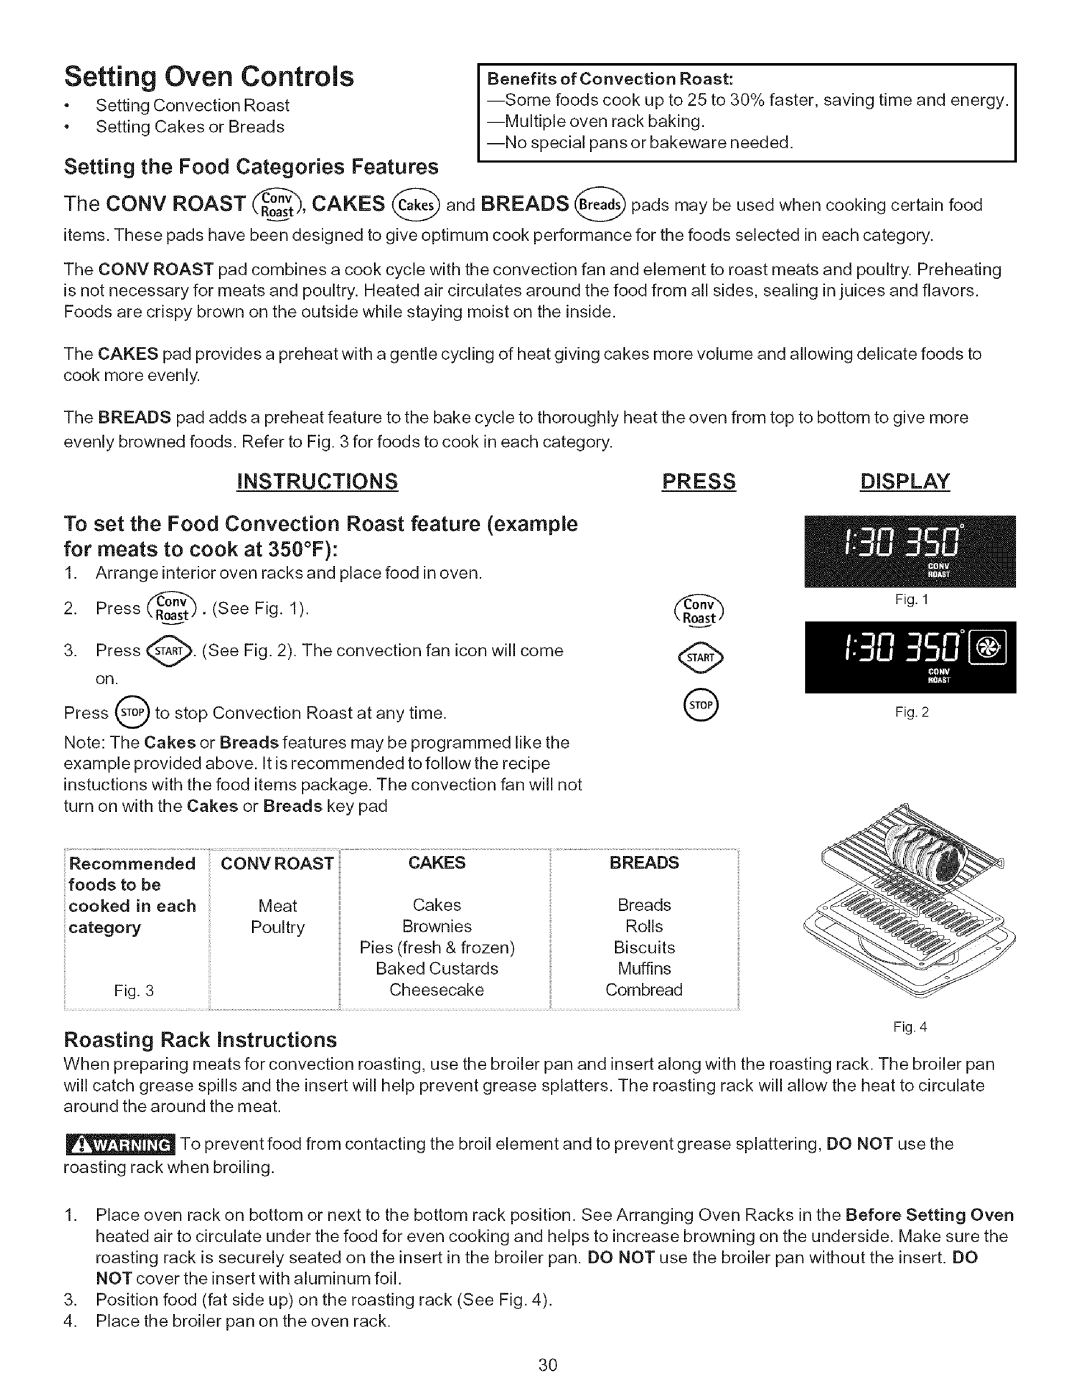 Kenmore 9664 Setting Oven Controls, Setting the Food Categories Features, Instructions, for meats to cook at 350F, Rack 